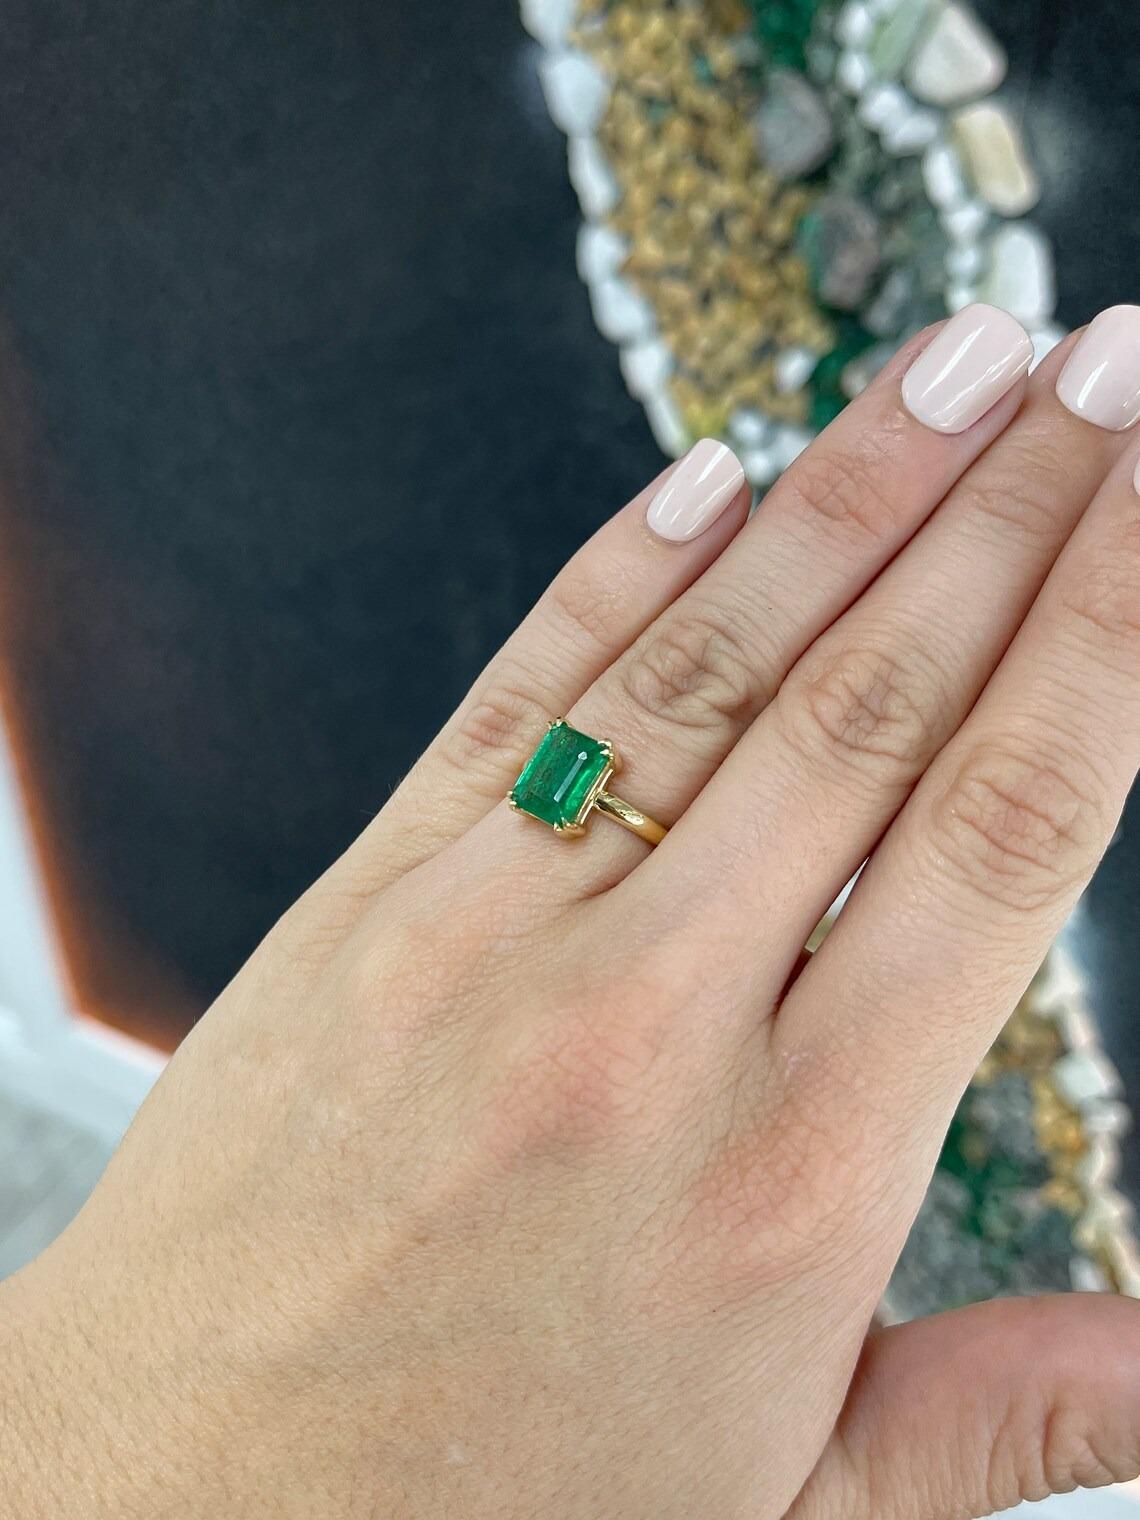 3.05ct AAA Vivid Green Zambian Emerald Cut Emerald Solitaire Prong Set Gold Ring In New Condition For Sale In Jupiter, FL